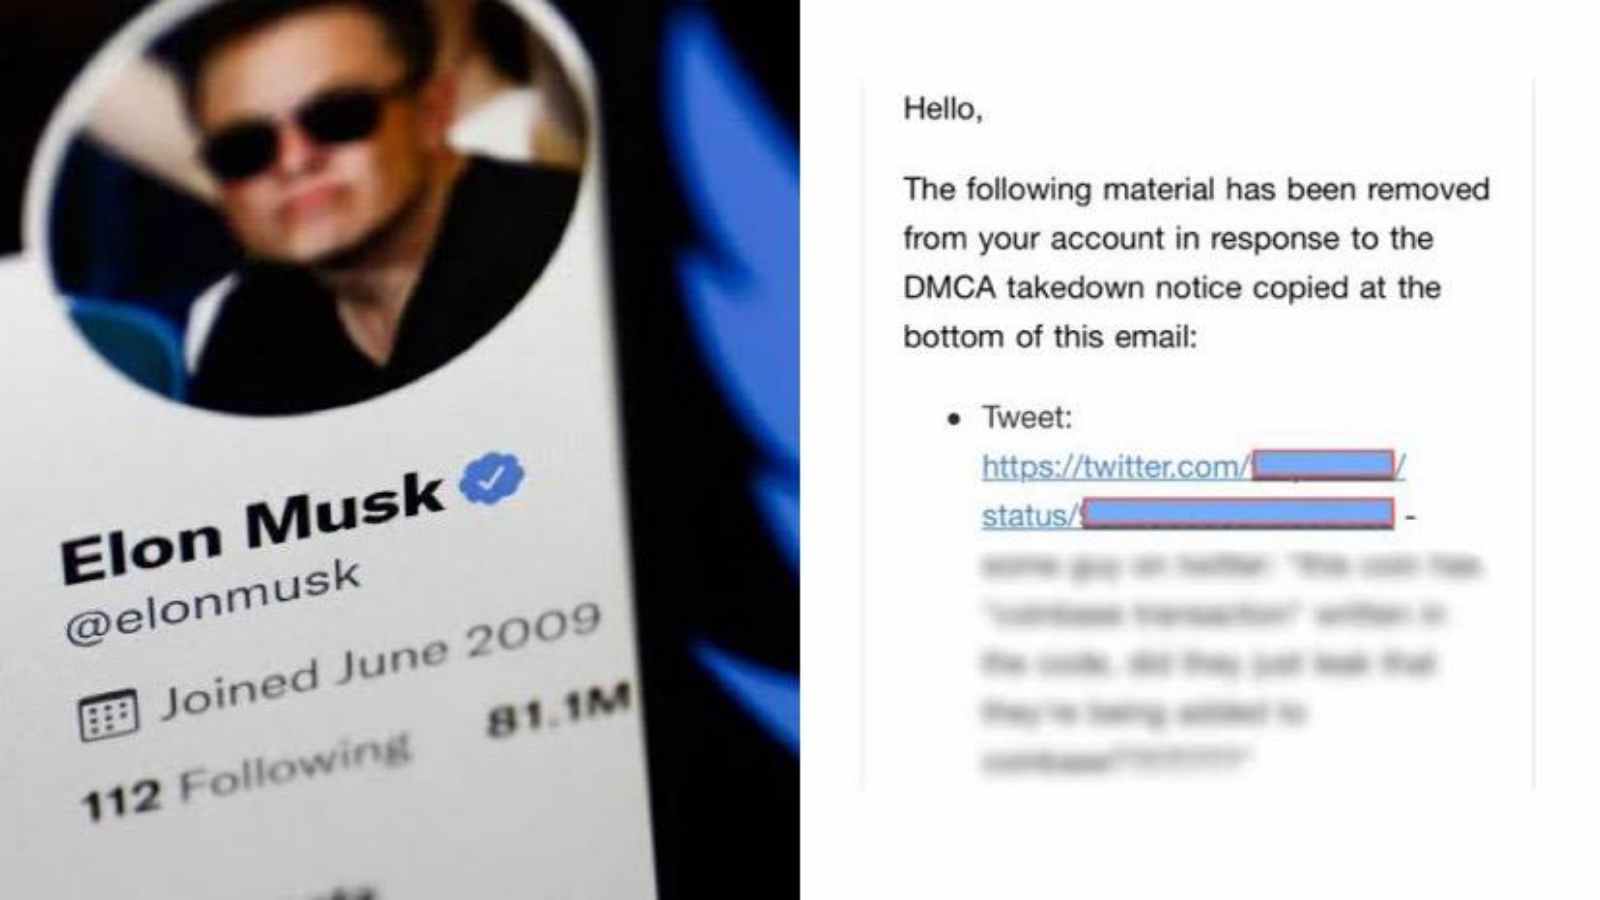 Elon Musk shares his opinions on DMCA on twitter